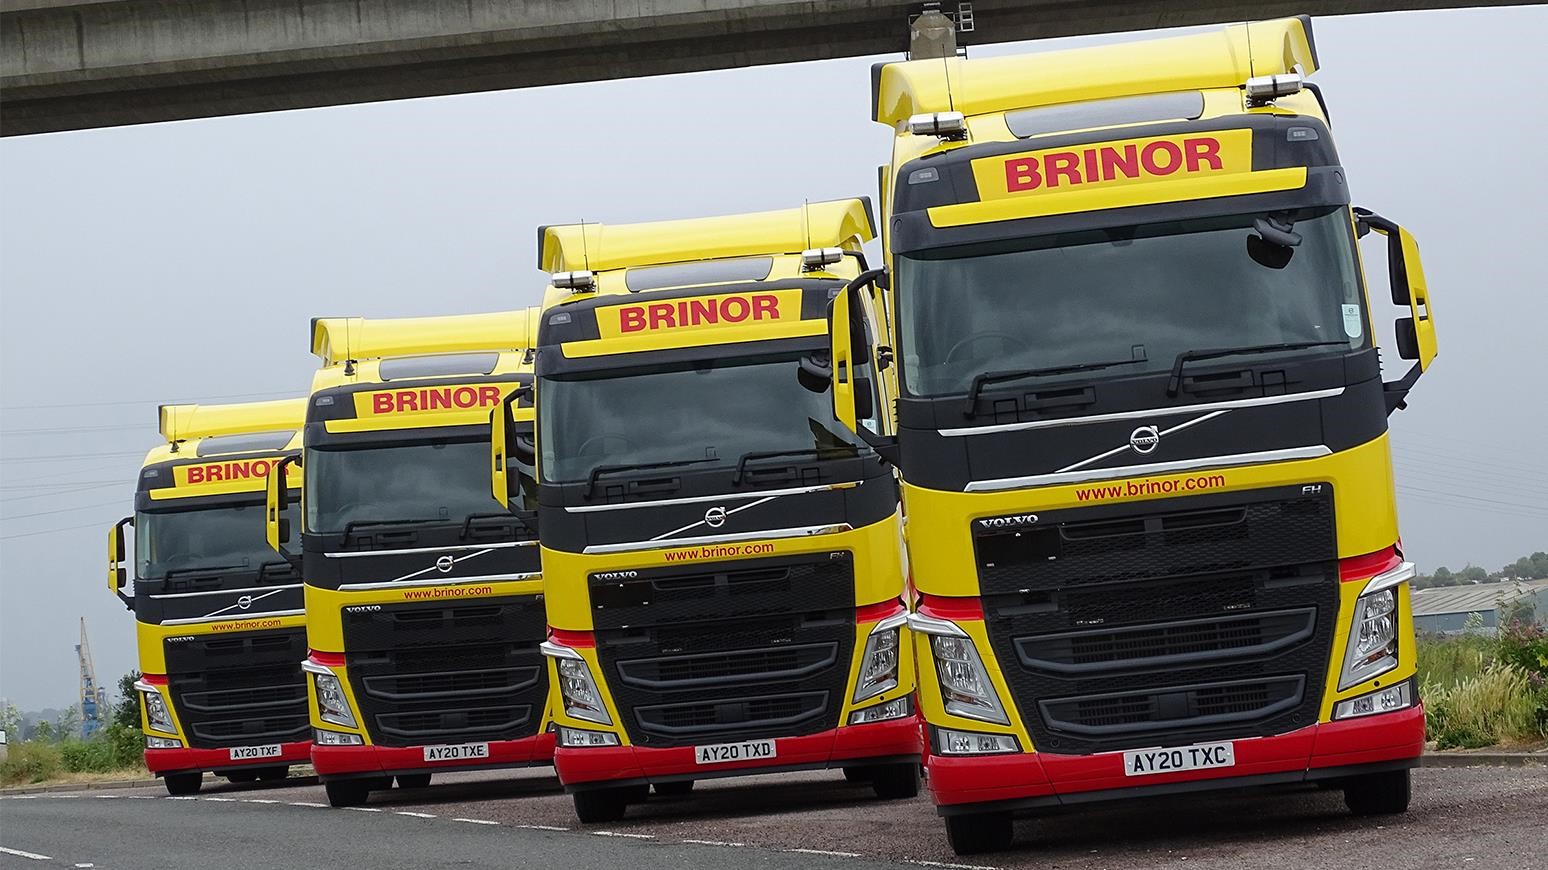 Suffolk-Based Brinor International Gets The Jump On DVS, LEZ Requirements With New Volvo FH Tractors